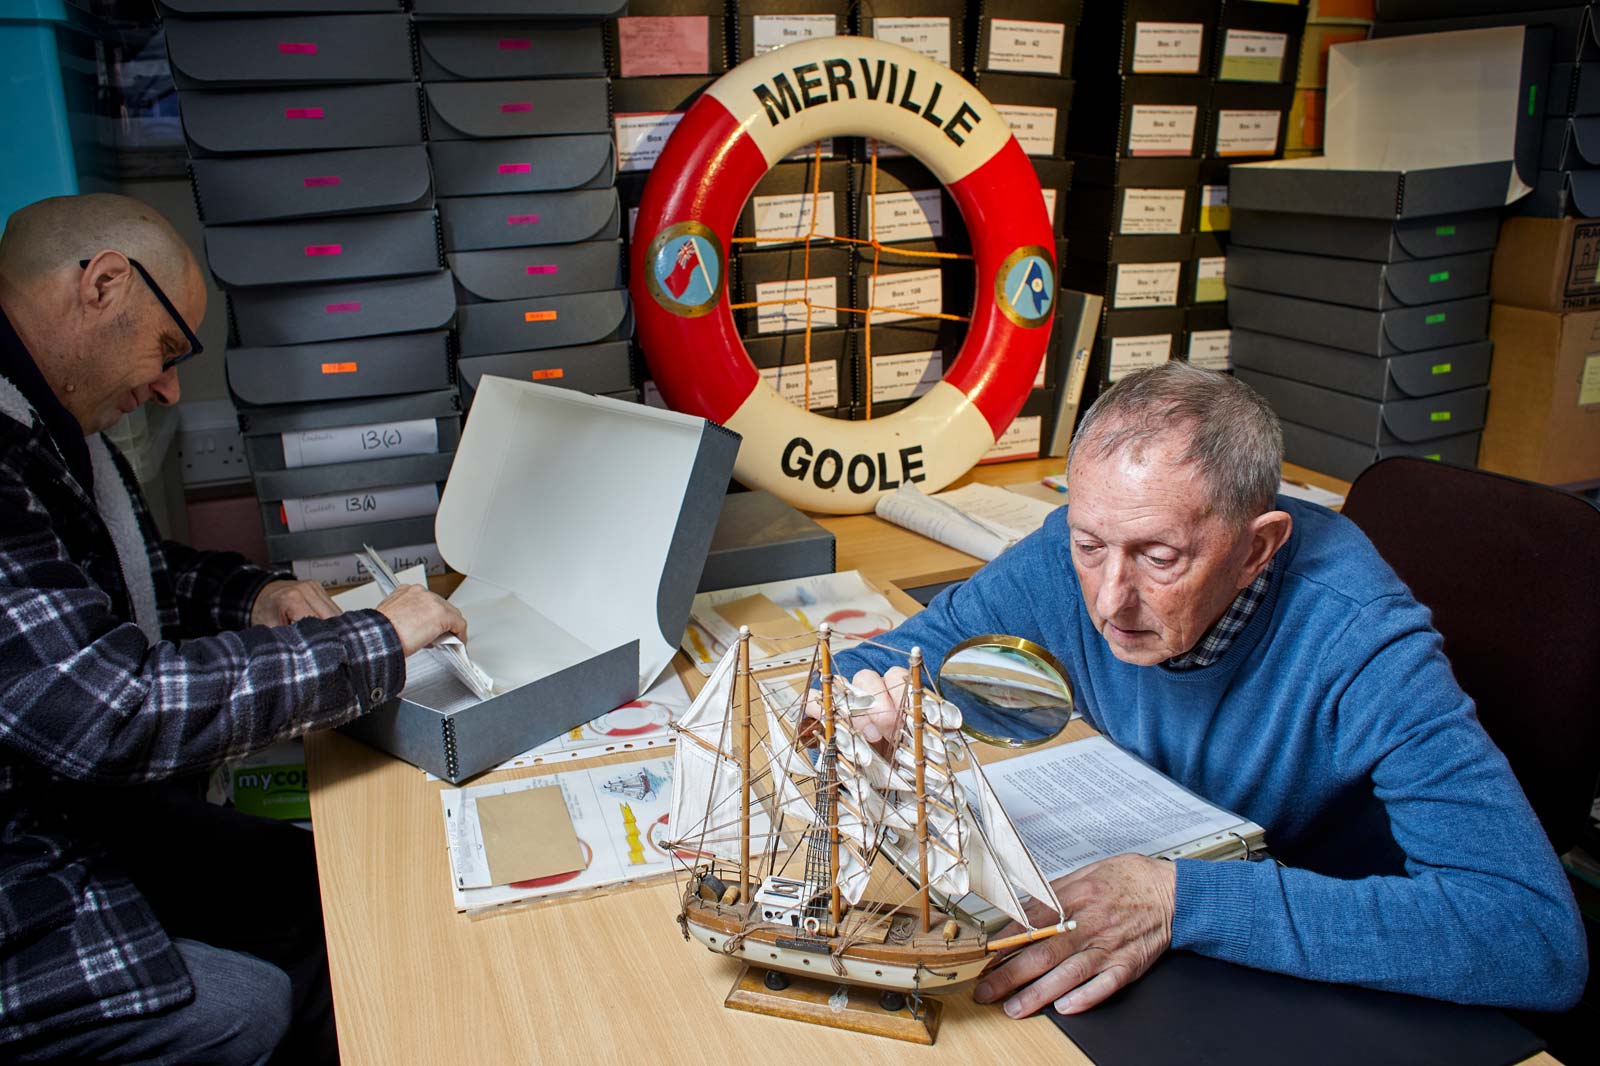 Local heritage archive project - Yorkshire Waterways Heritage Society | Community Funding